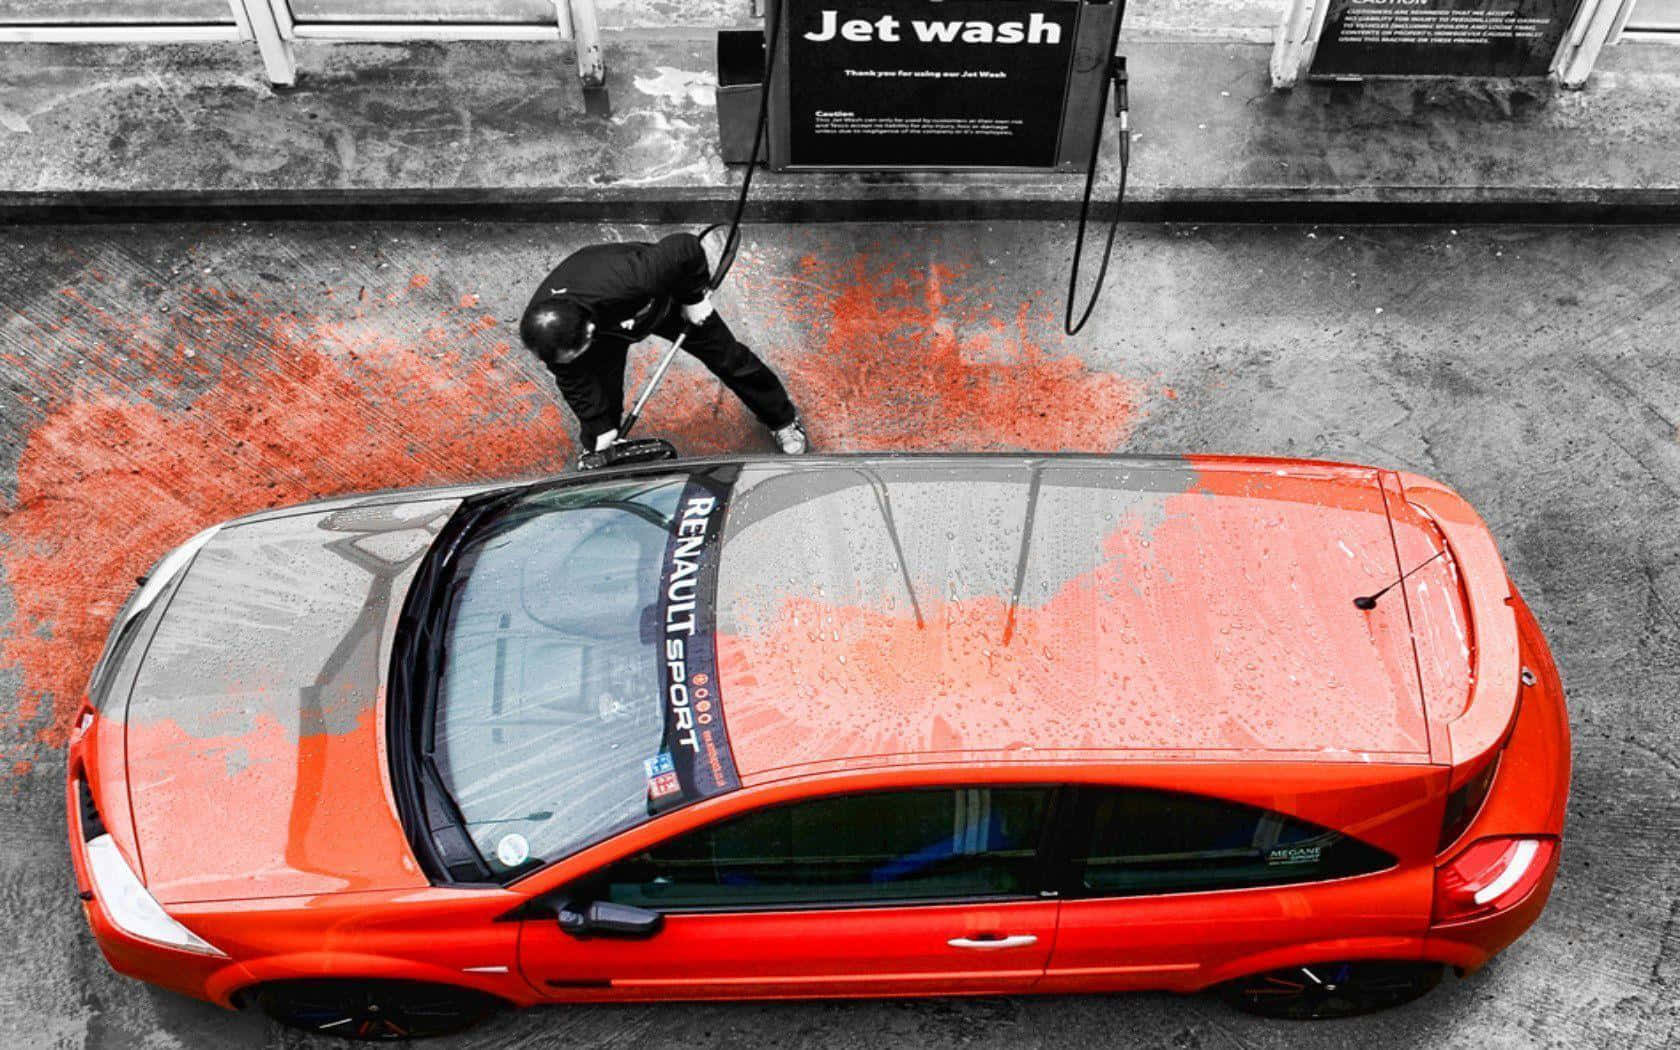 A Man Is Washing A Car With A Jet Wash